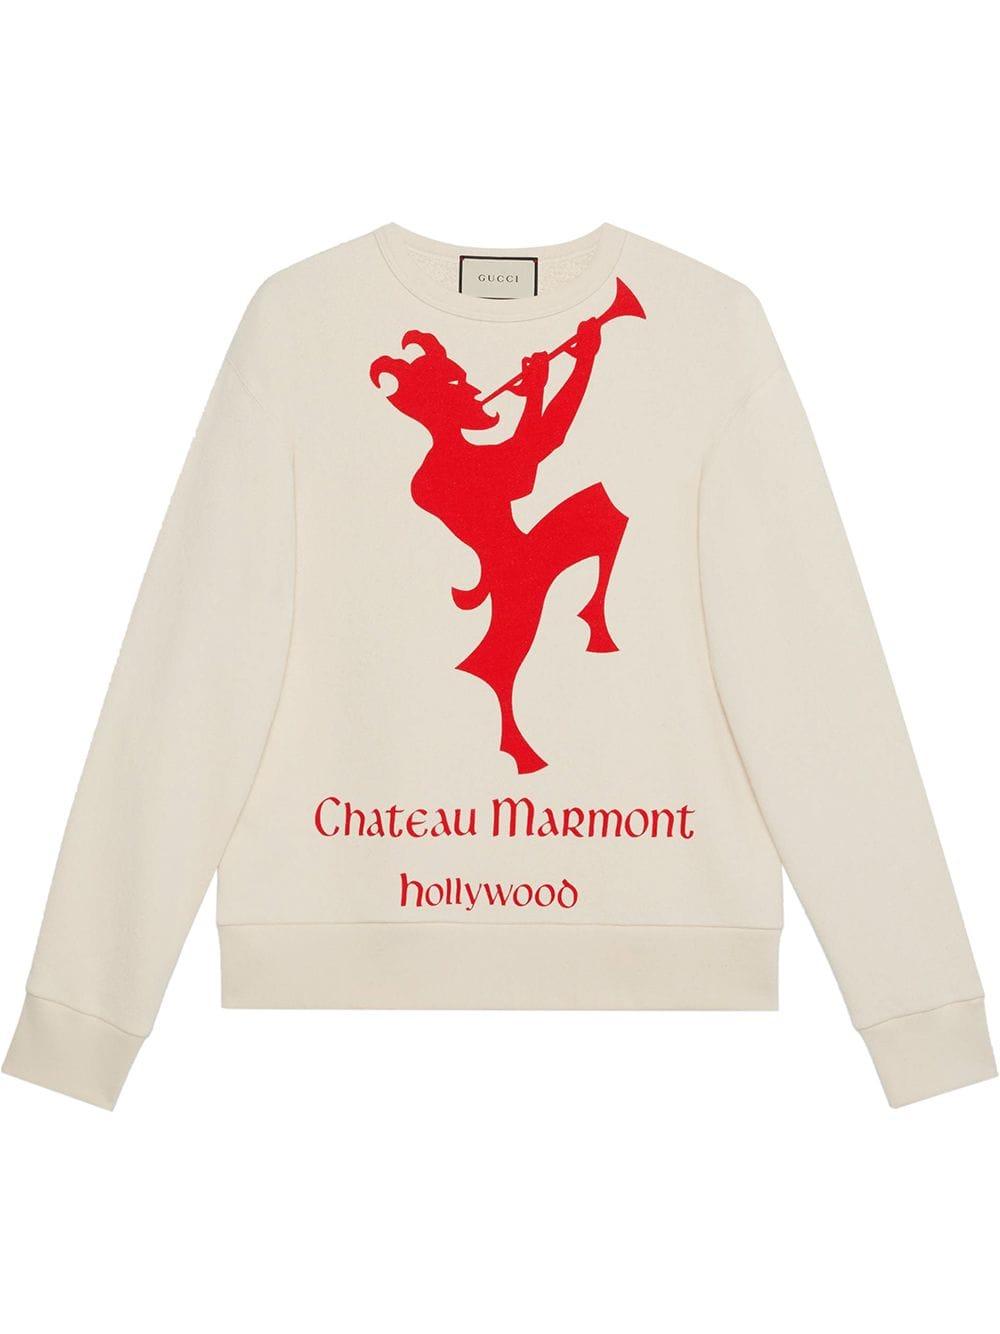 Gucci Sweatshirt With Chateau Marmont Print in White for Men | Lyst